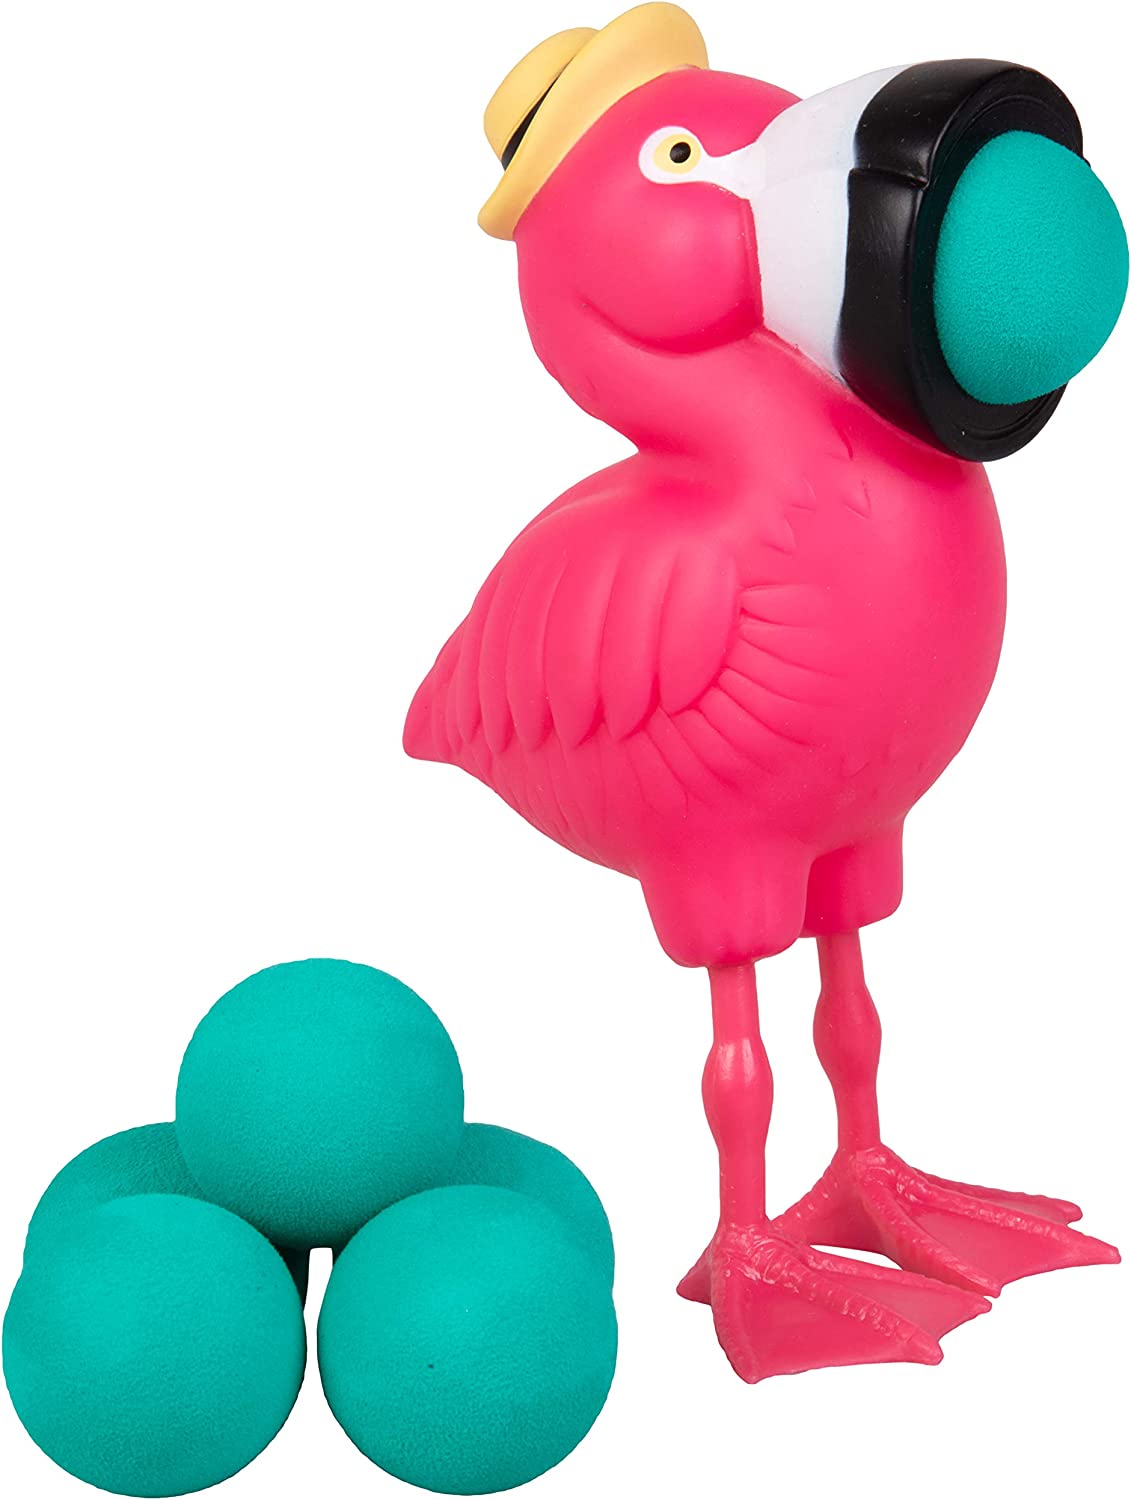 Hog Wild Flamingo Popper Toy - Shoot Foam Balls Up to 20 Feet - 6 Balls Included - Age 4+ - image 1 of 5